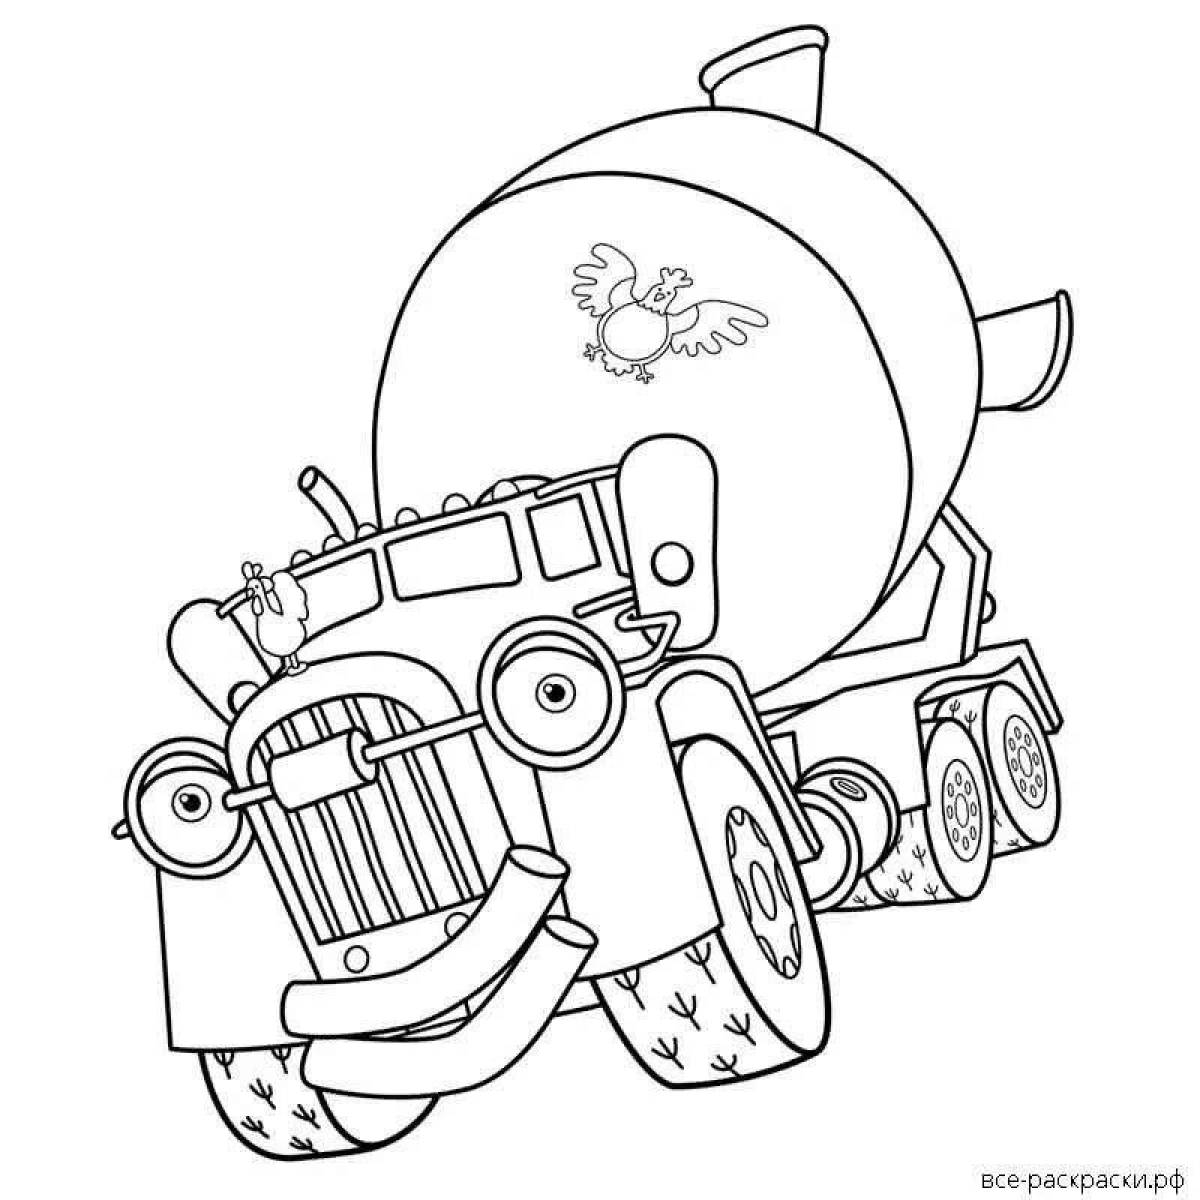 A fun concrete mixer coloring page for toddlers